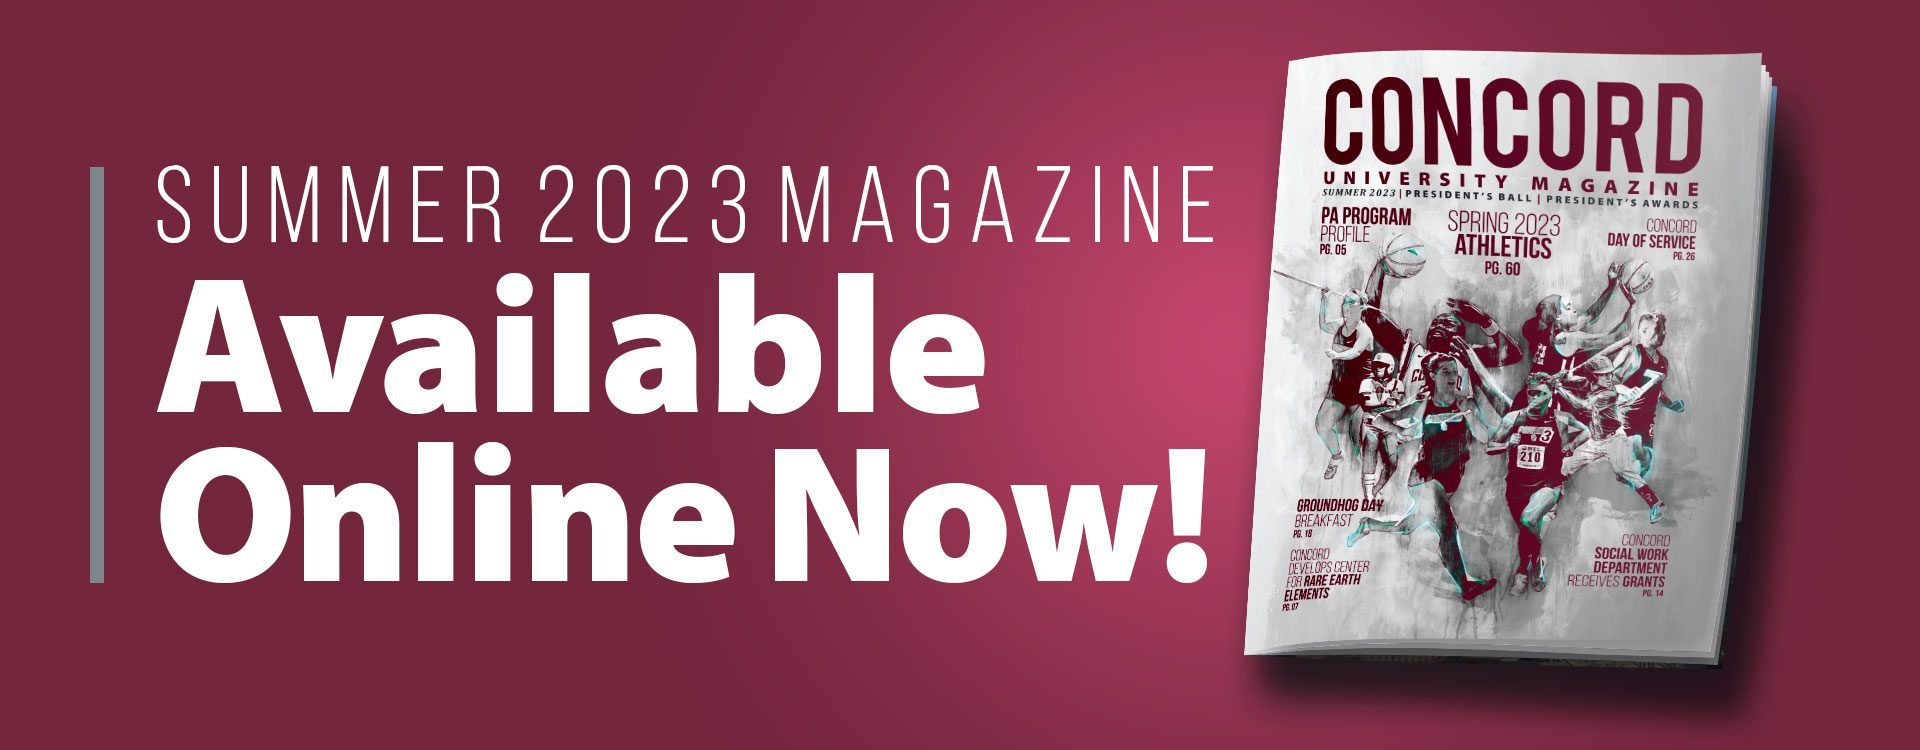 Concord University's Summer 2023 Magazine is available now on our website! Click here to read it